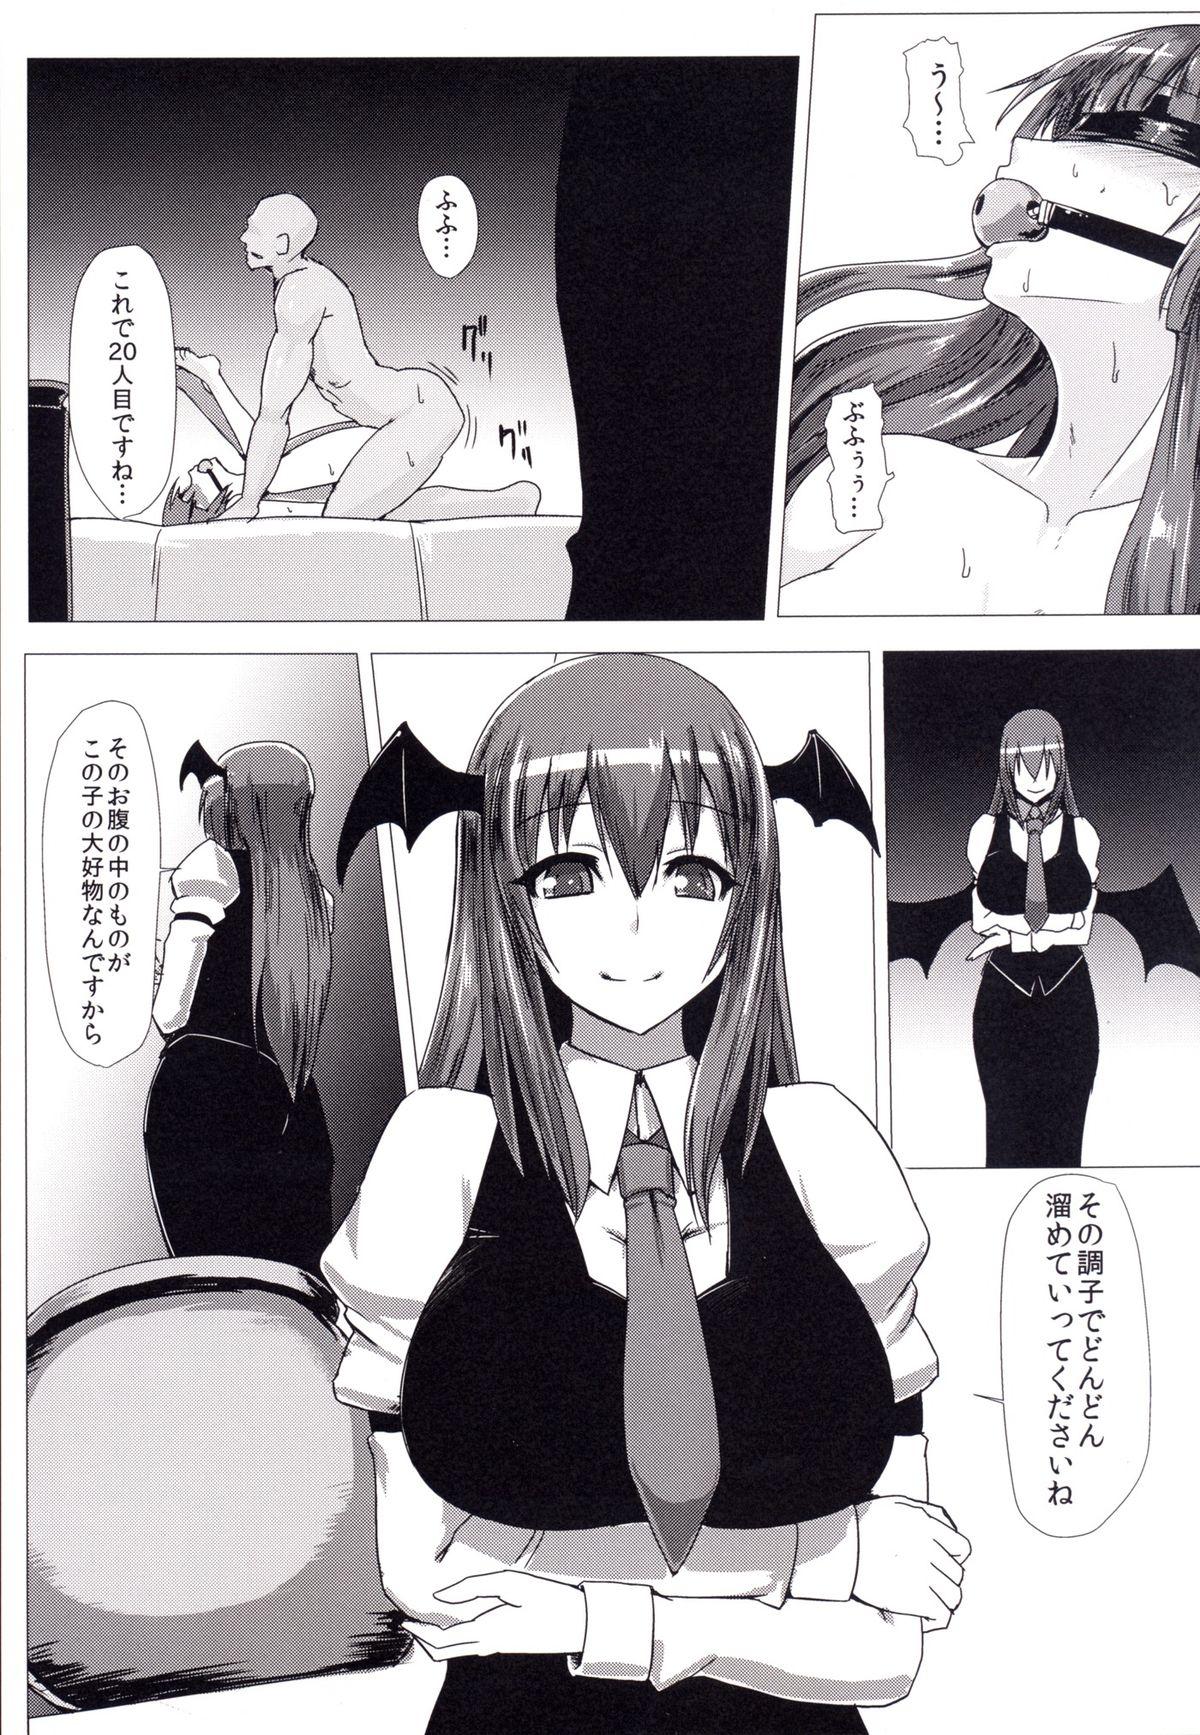 Best Blowjob Shiri Pache Pache - Touhou project Gay Orgy - Page 4